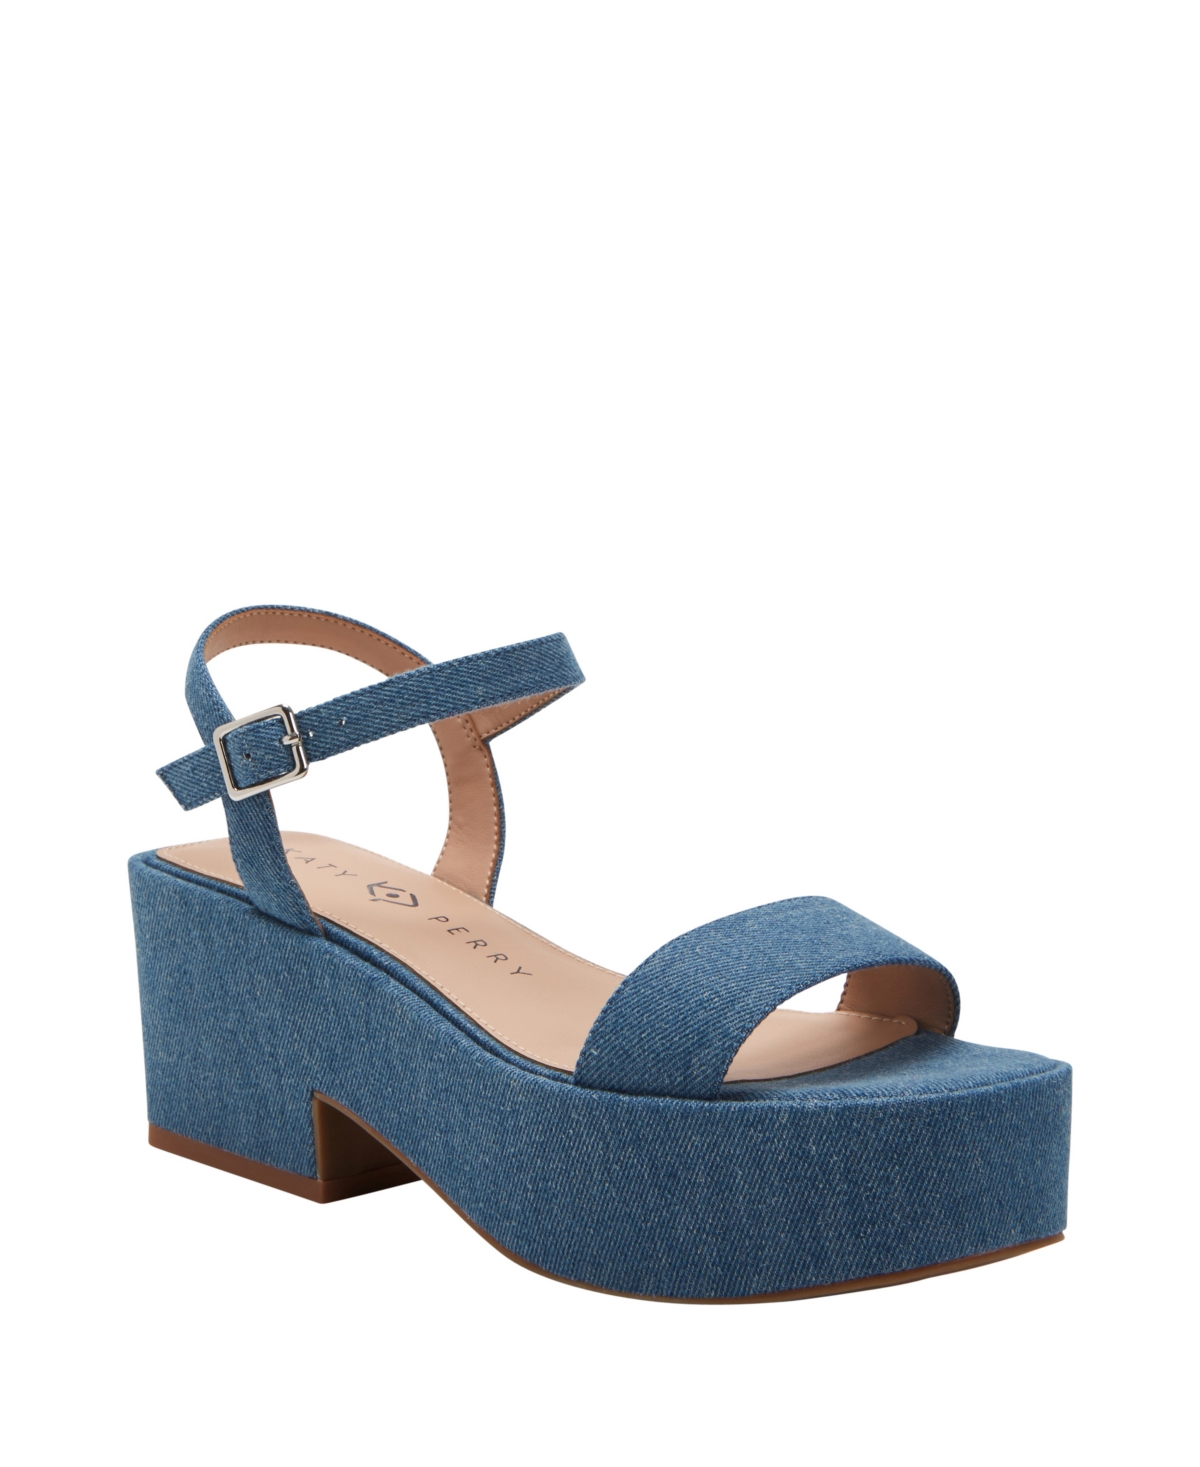 Shop Katy Perry Women's Busy Bee Strappy Platform Sandals In Blue Denim